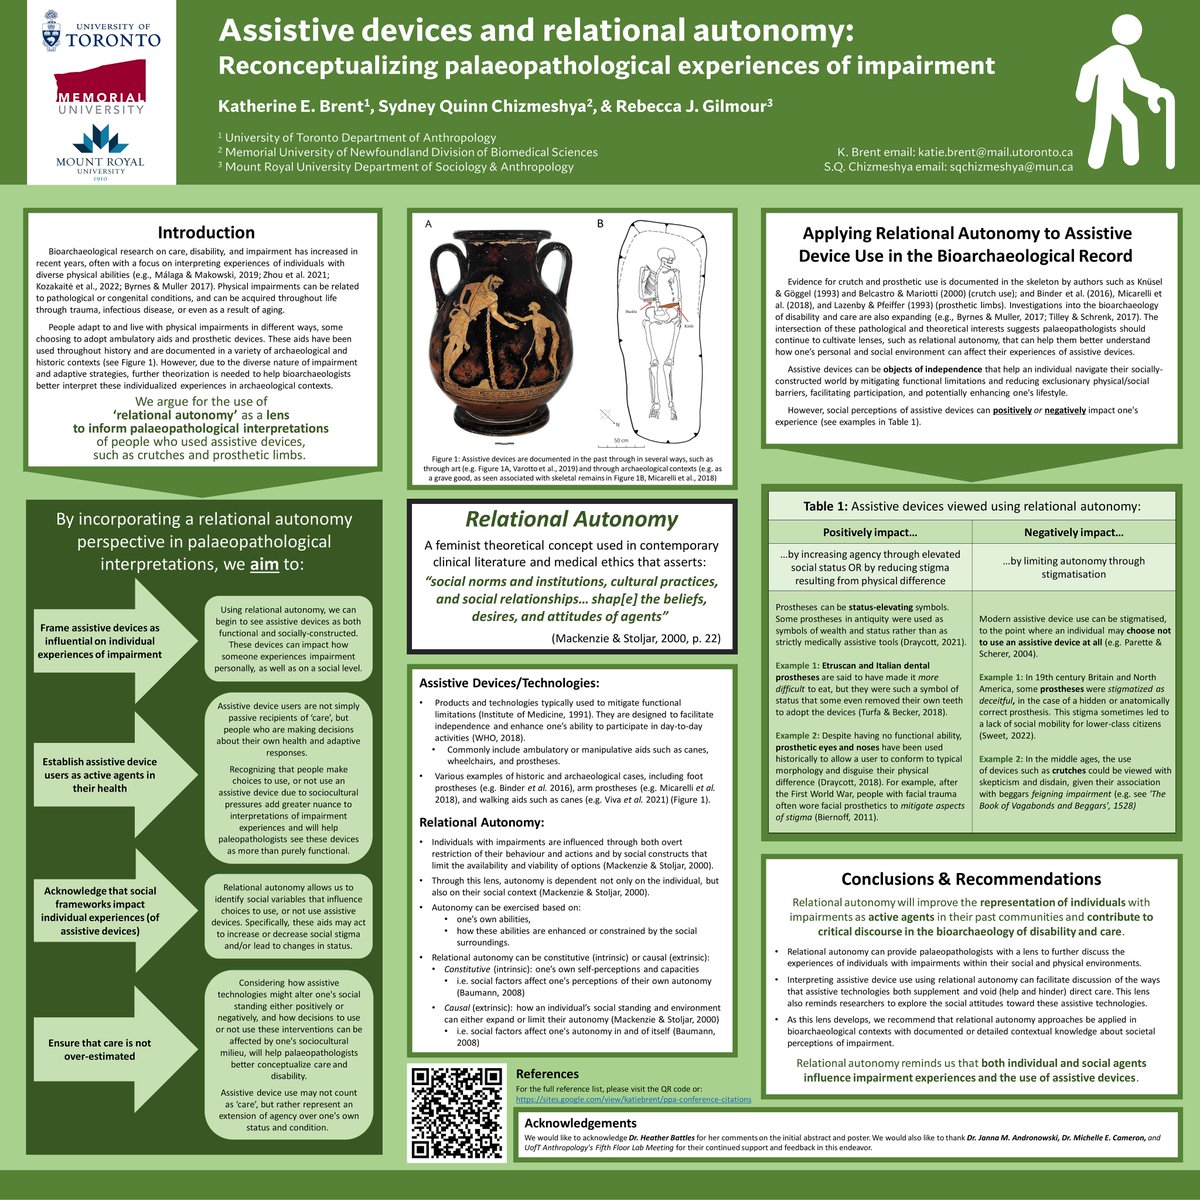 #PPA2022 is on & (virtual) posters are live! Check out @kathbrent, @SChizmeshya, and my poster on '#AssistiveDevices and #RelationalAutonomy: Reconceptualizing #palaeopathological experiences of #impairment'
We'd love to hear from you - pls be in touch if you have comments!